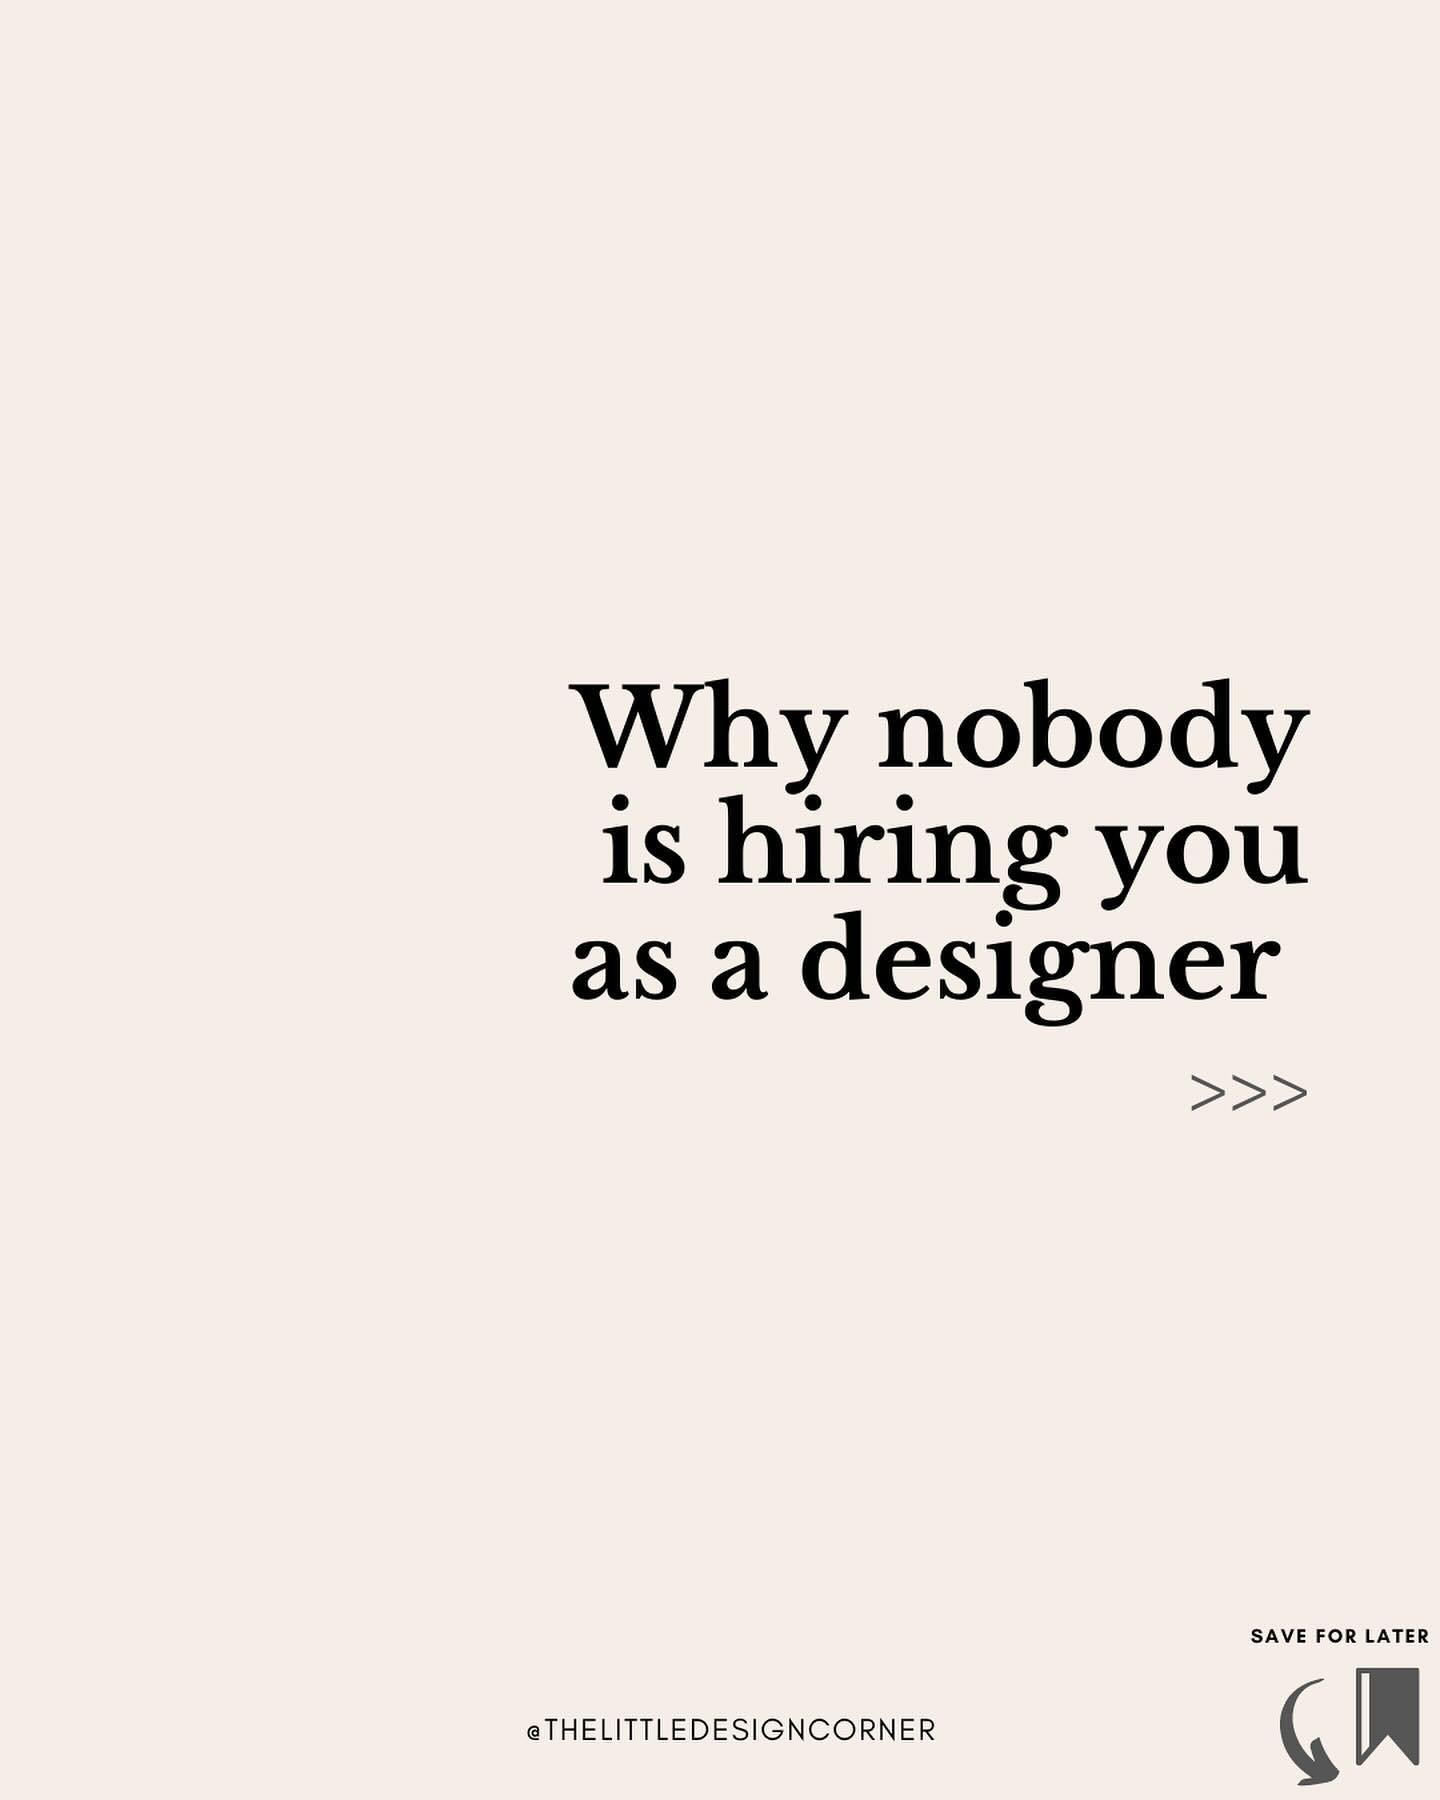 If you&rsquo;re struggling to find design clients it may be for one of these reasons [💾SAVE + SWIPE&gt;&gt;&gt;]

Also - if you&rsquo;re new here&hellip;

👋 Follow me&nbsp;@thelittledesigncorner&nbsp;and binge all the other content I have to help y